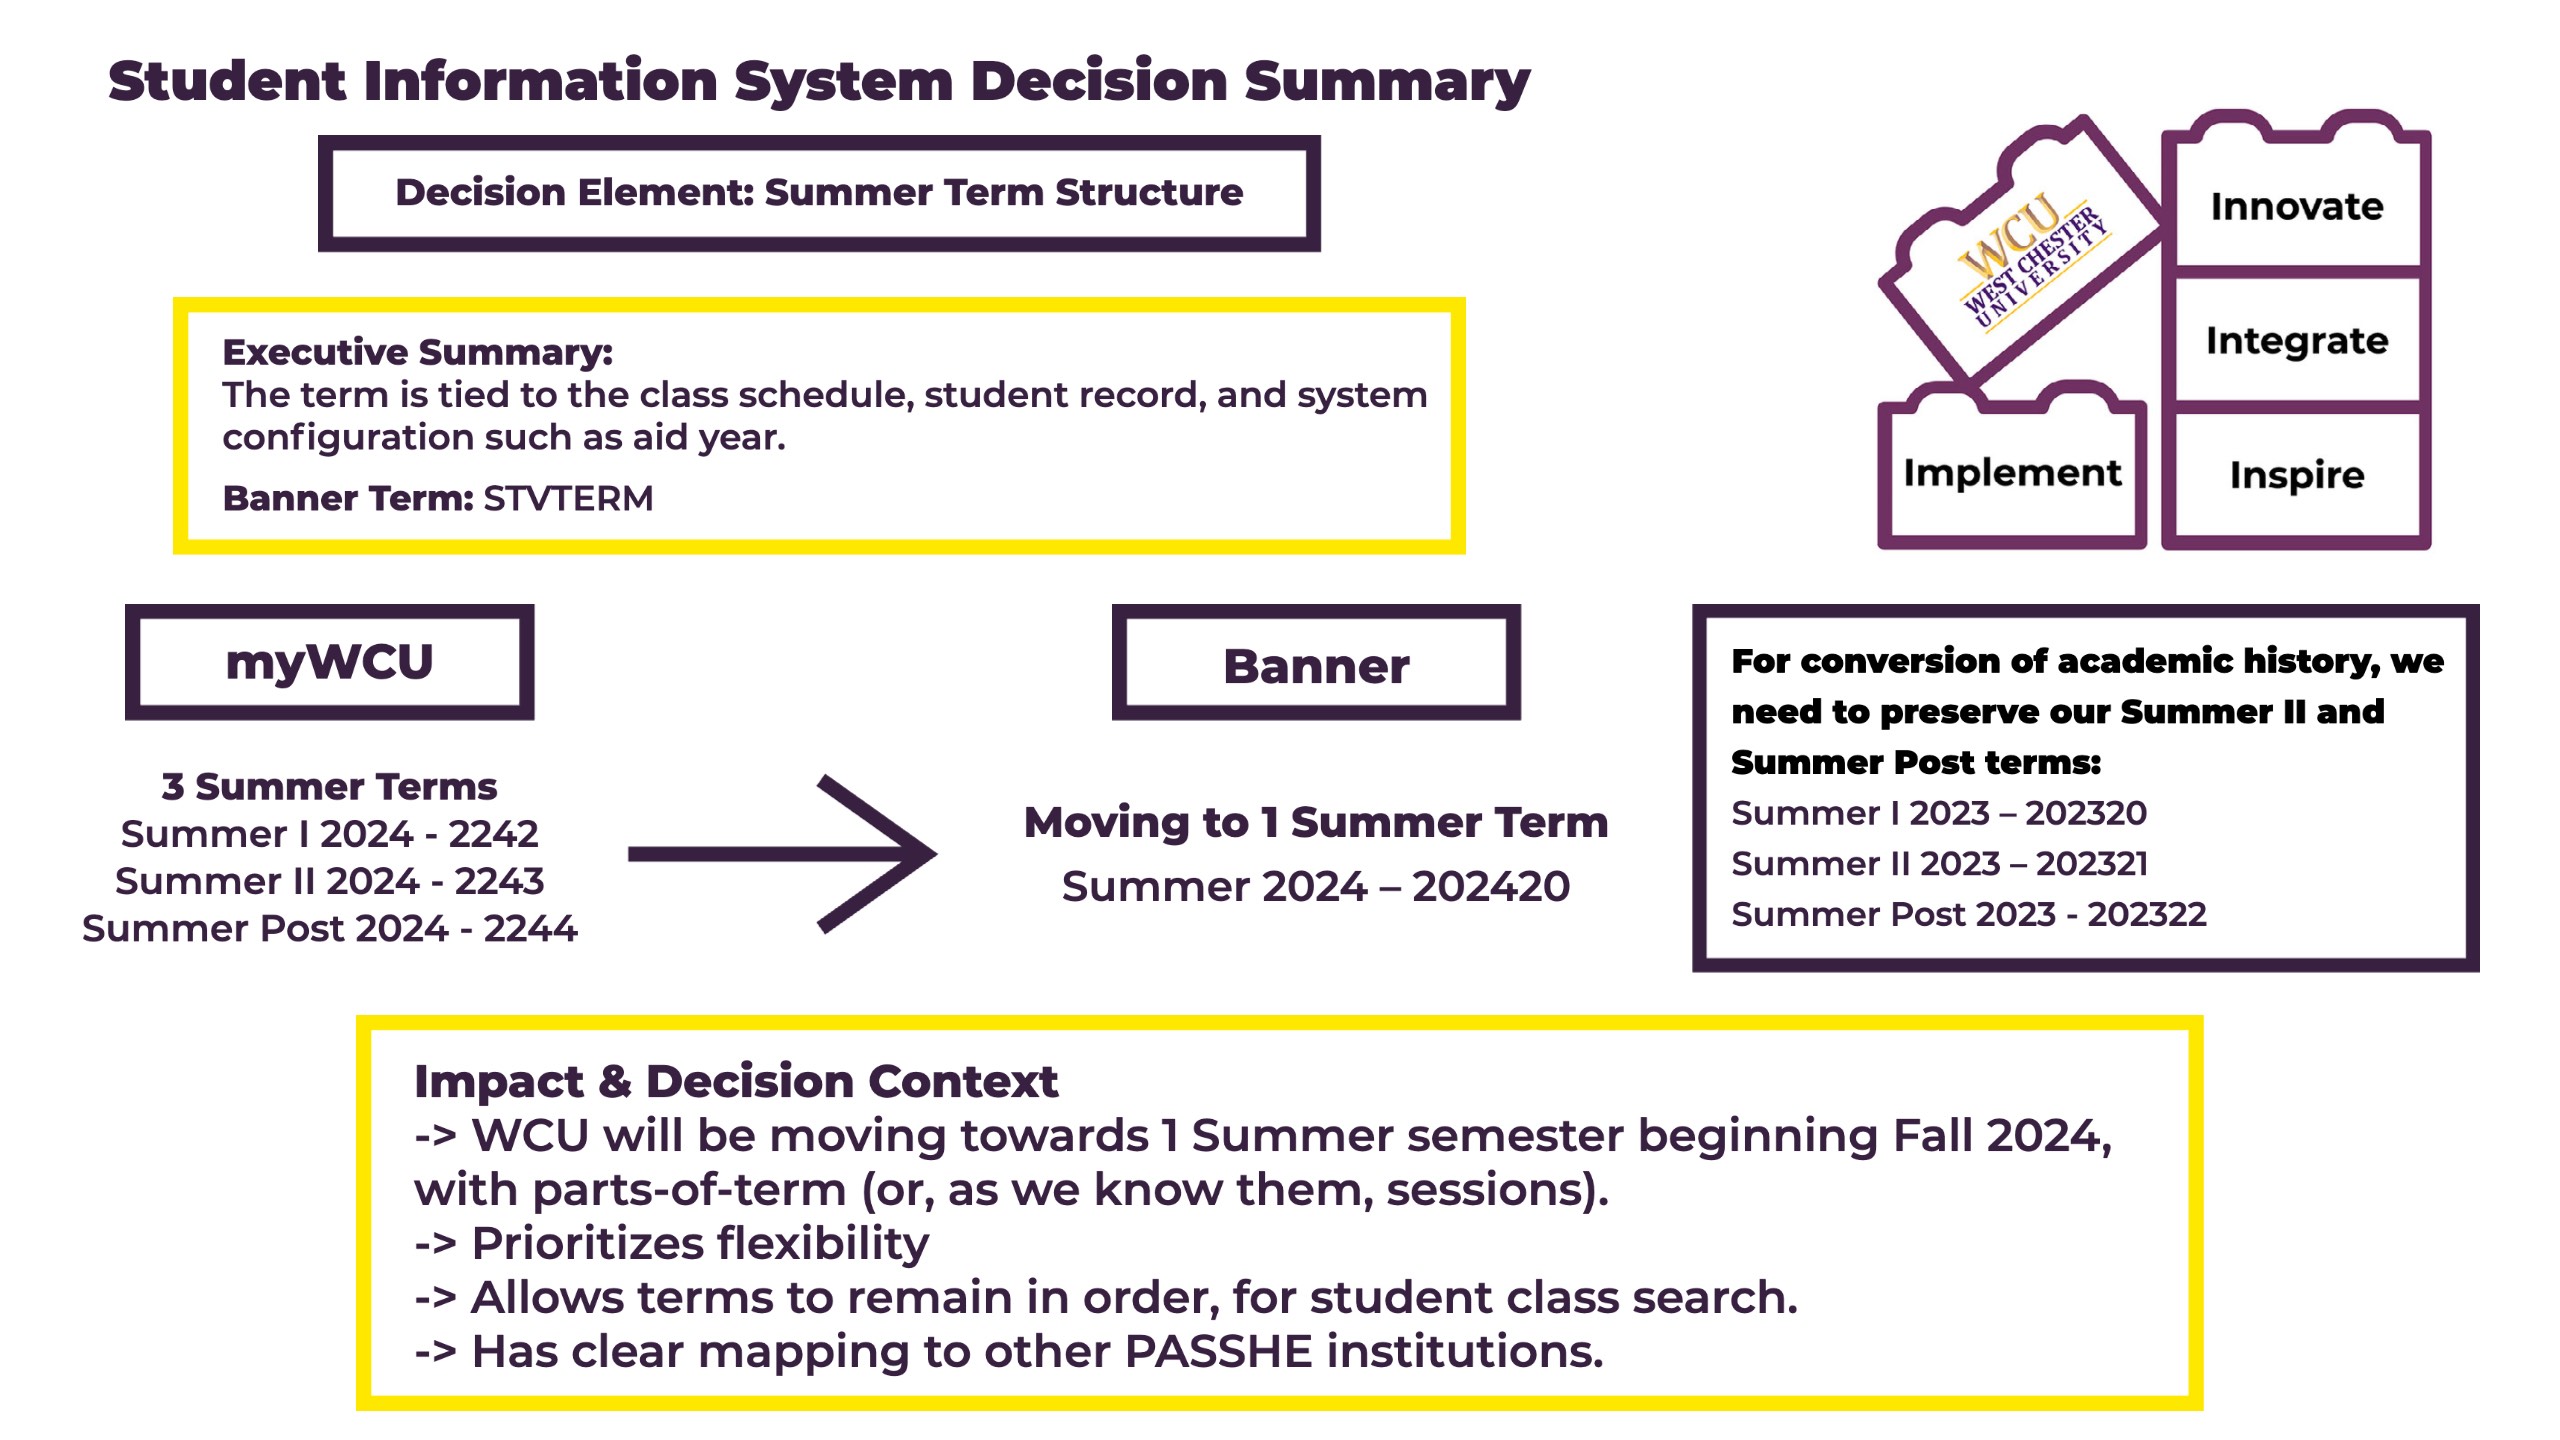 Student Information System Decision Summary; Decision Element: Summer Term Structure; Executive Summary: The term is tied to the class schedule, student record, and system configuration such as aid year. Banner Term: STVTERM myWCU 3 Summer Terms Summer I 2024 - 2242 Summer II 2024 - 2243 Summer Post 2024 - 2244 ↑ Banner Moving to 1 Summer Term Summer 2024 – 202420 WCU WEST CHESTER UNIVERSITY Implement Innovate Impact & Decision Context -> WCU will be moving towards 1 Summer semester beginning Fall 2024, with parts-of-term (or, as we know them, sessions). -> Prioritizes flexibility -> Allows terms to remain in order, for student class search. -> Has clear mapping to other PASSHE institutions. Integrate nspire For conversion of academic history, weneed to preserve our Summer II and Summer Post terms: Summer I 2023 - 202320 Summer II 2023 202321 Summer Post 2023 - 202322